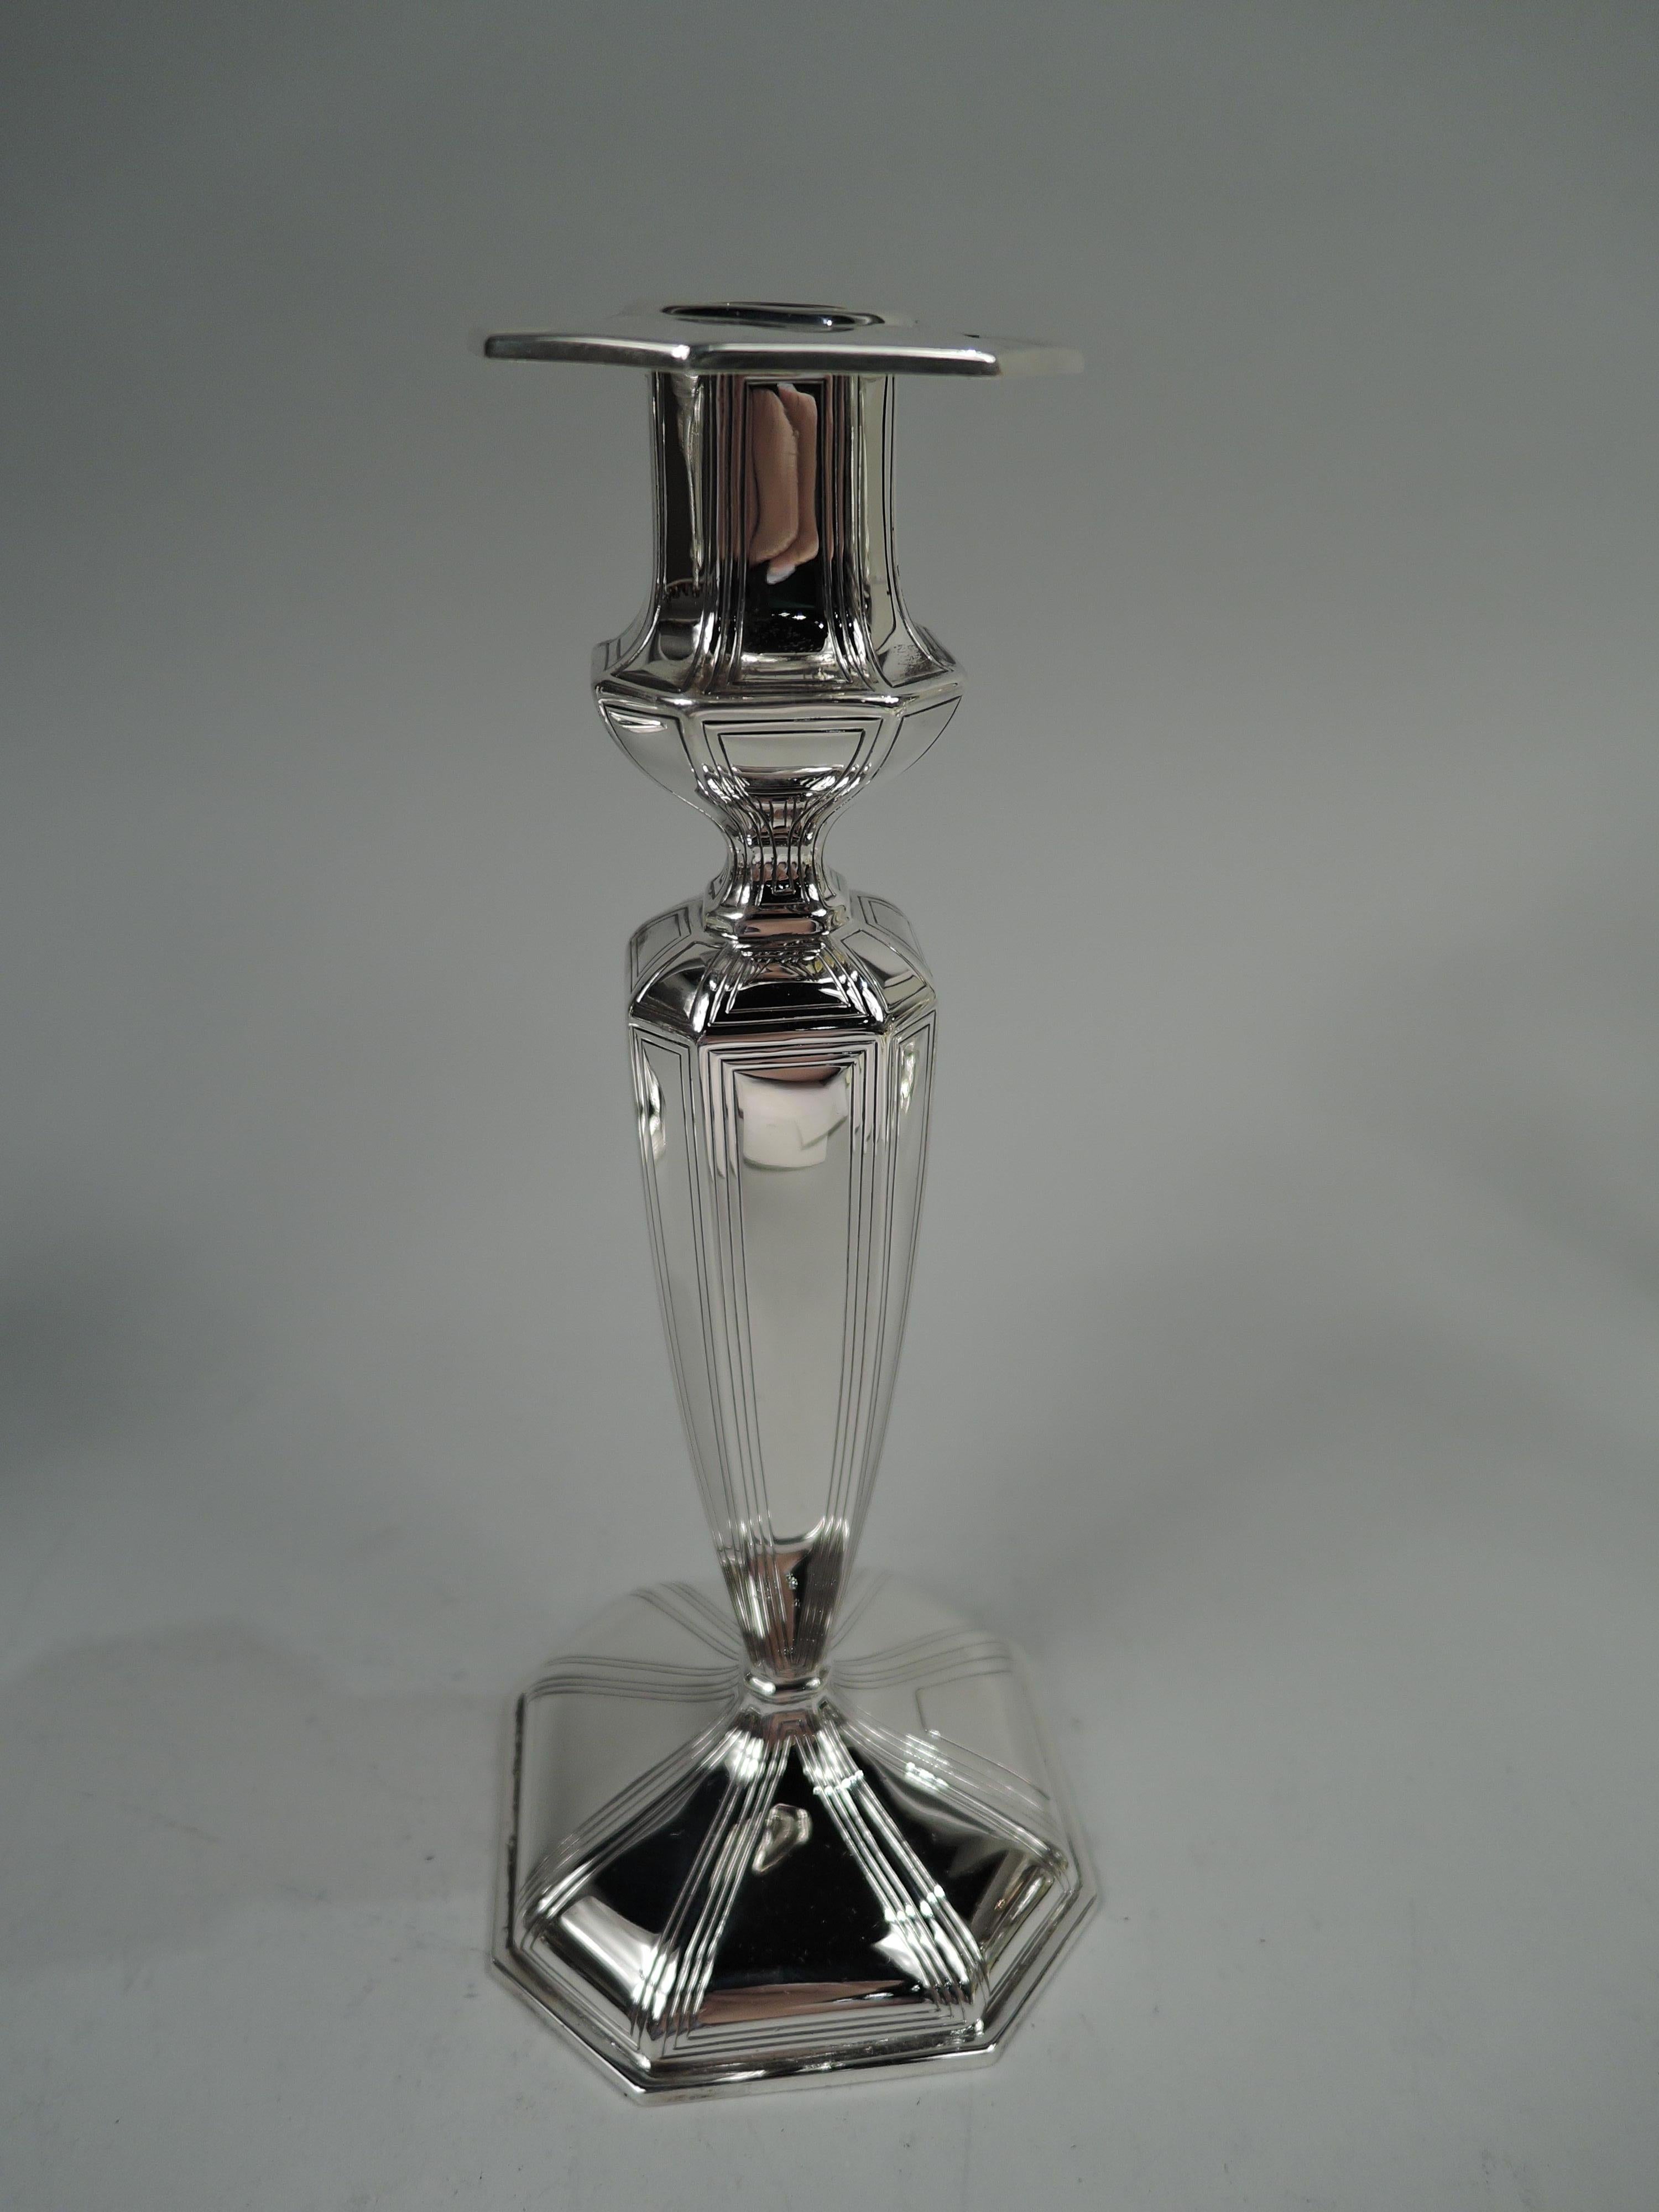 Pair of Edwardian Georgian sterling silver candlesticks, 1927. Retailed by Black, Starr & Frost in New York. Each: Bellied socket with detachable bobeche; tapering shaft on raised foot. Faceted with lined frames. Foot has applied trapezoidal mono